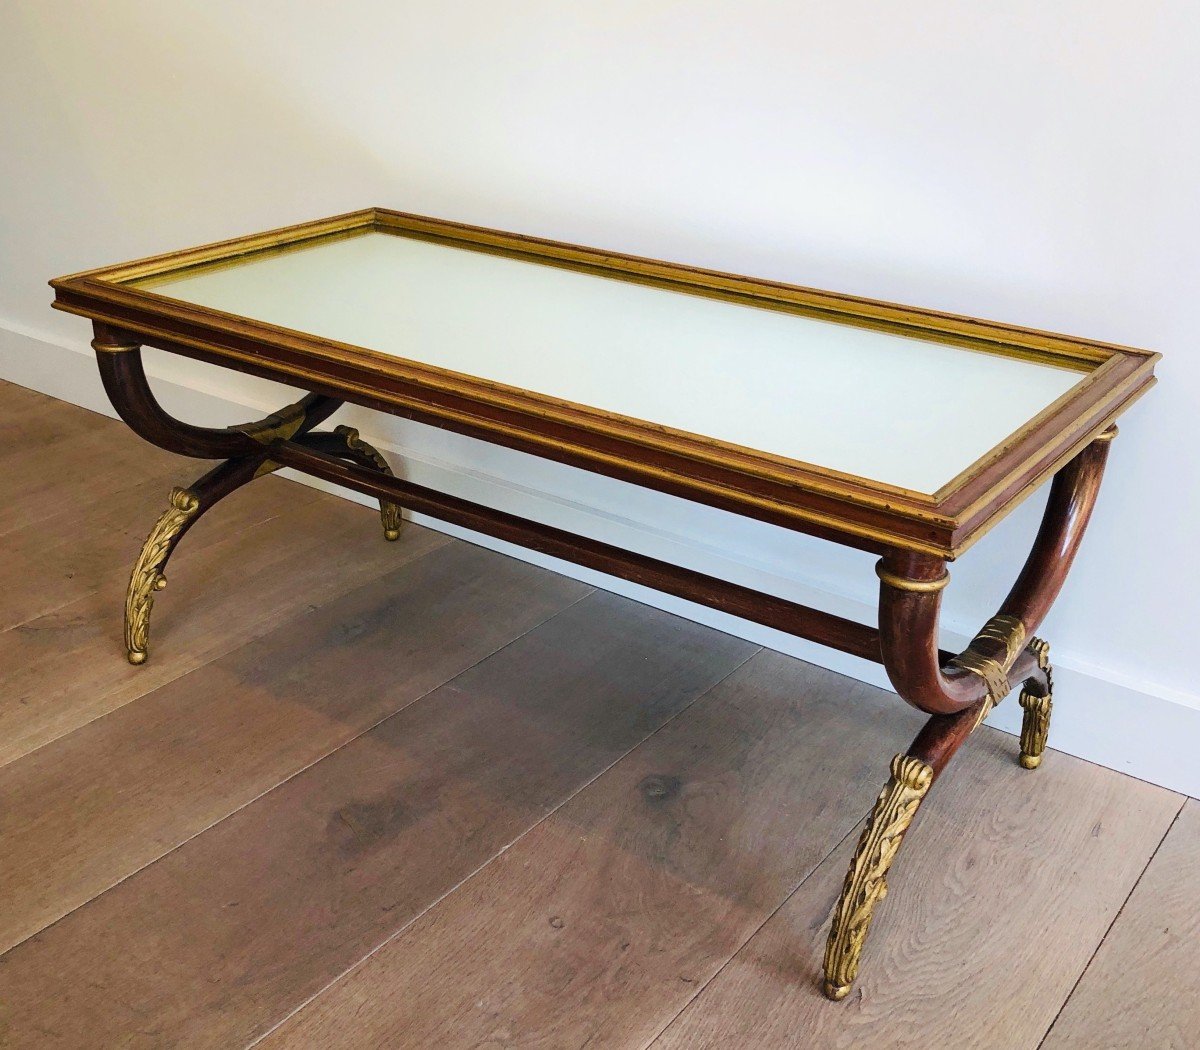 Maison Hirch. Carved And Gilt Wood Coffee Table With Mirror Top. French Work Signed M Hirch